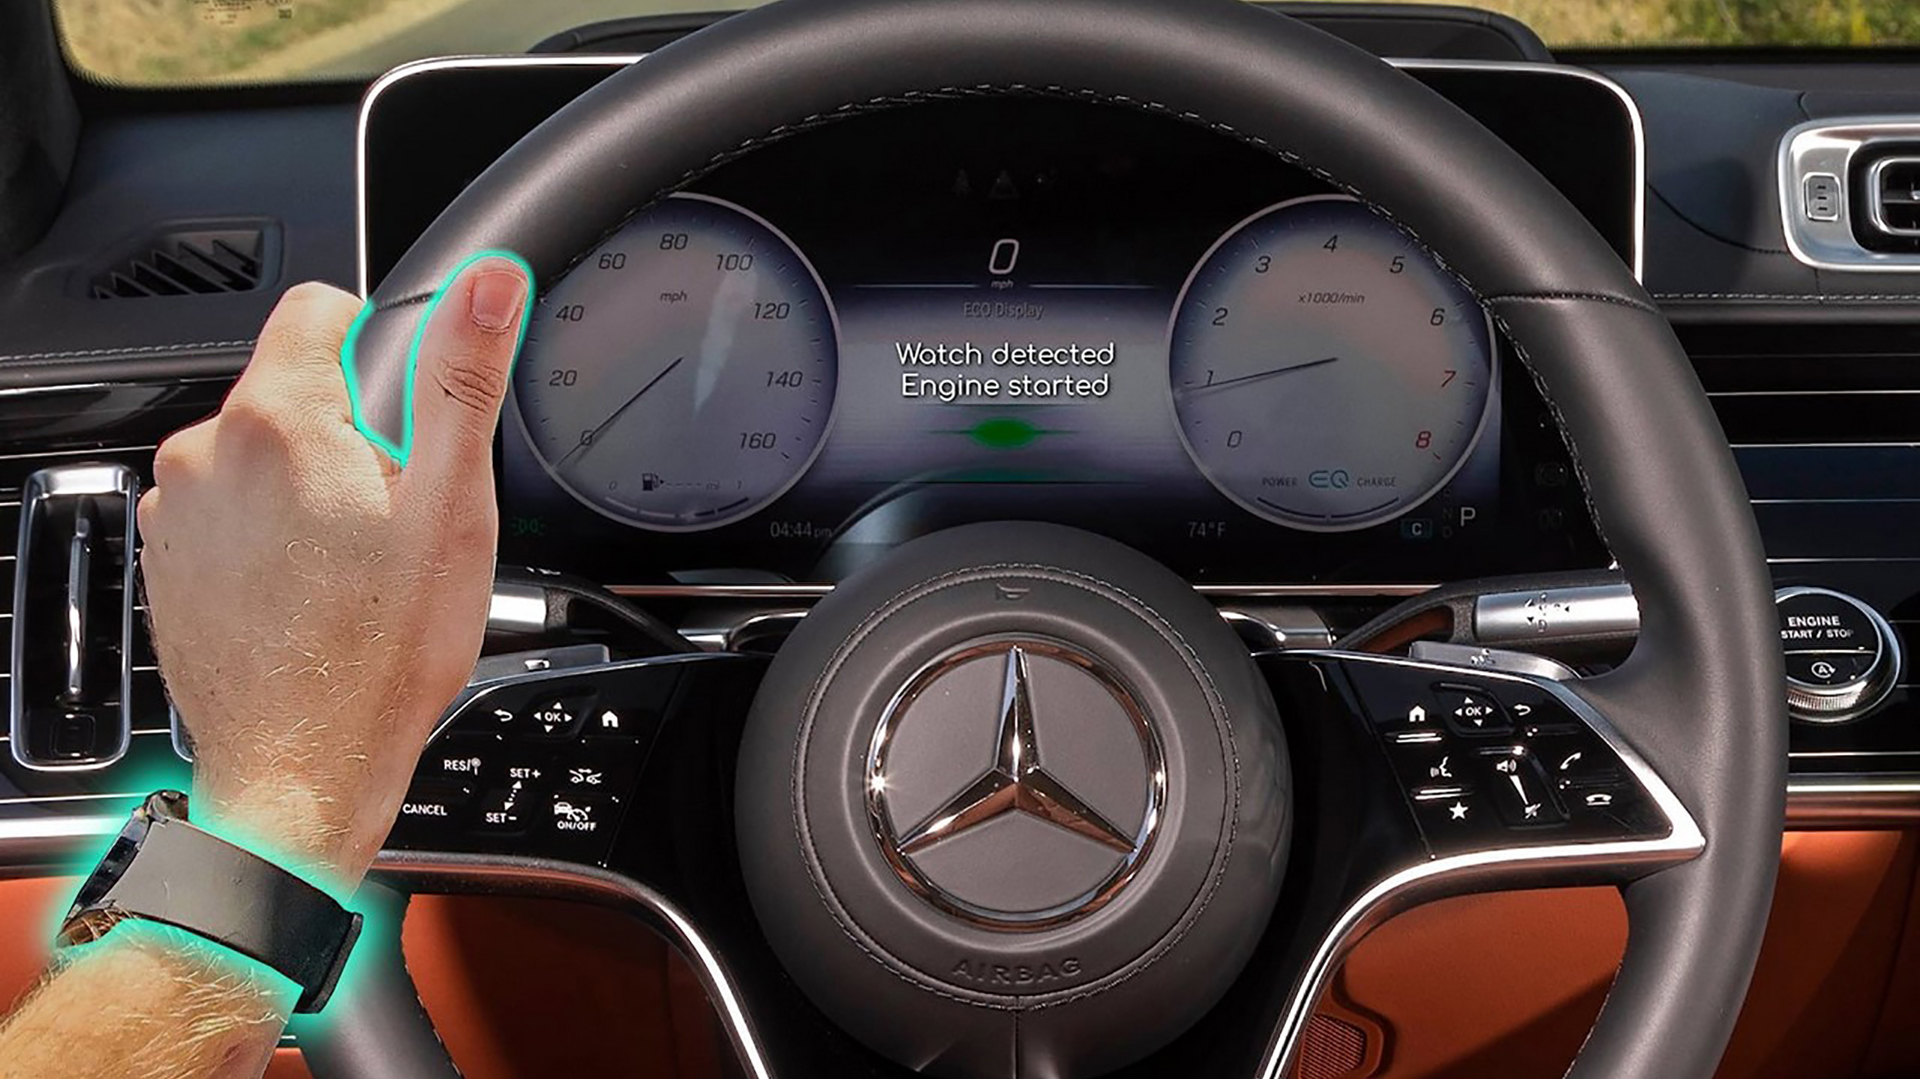 Mercedes has patented a driver identification mode, which checks biometrics and health status before starting the engine